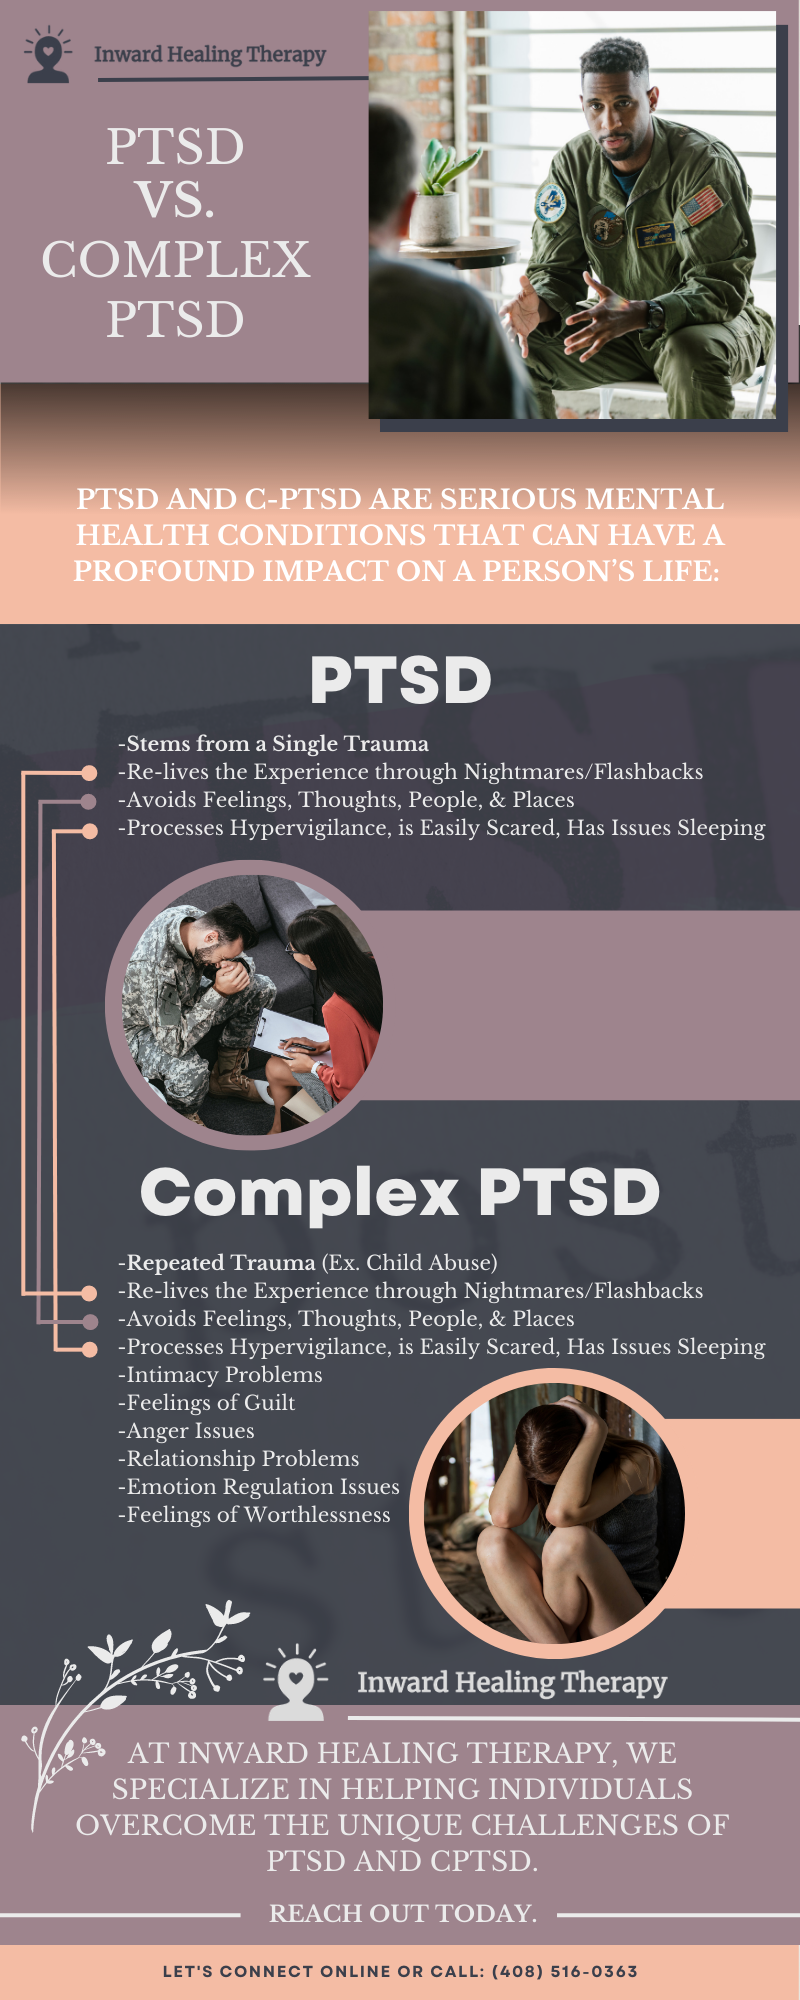 M38028 - Inward Healing Therapy - Infographic - PTSD Vs. Complex PTSD.png